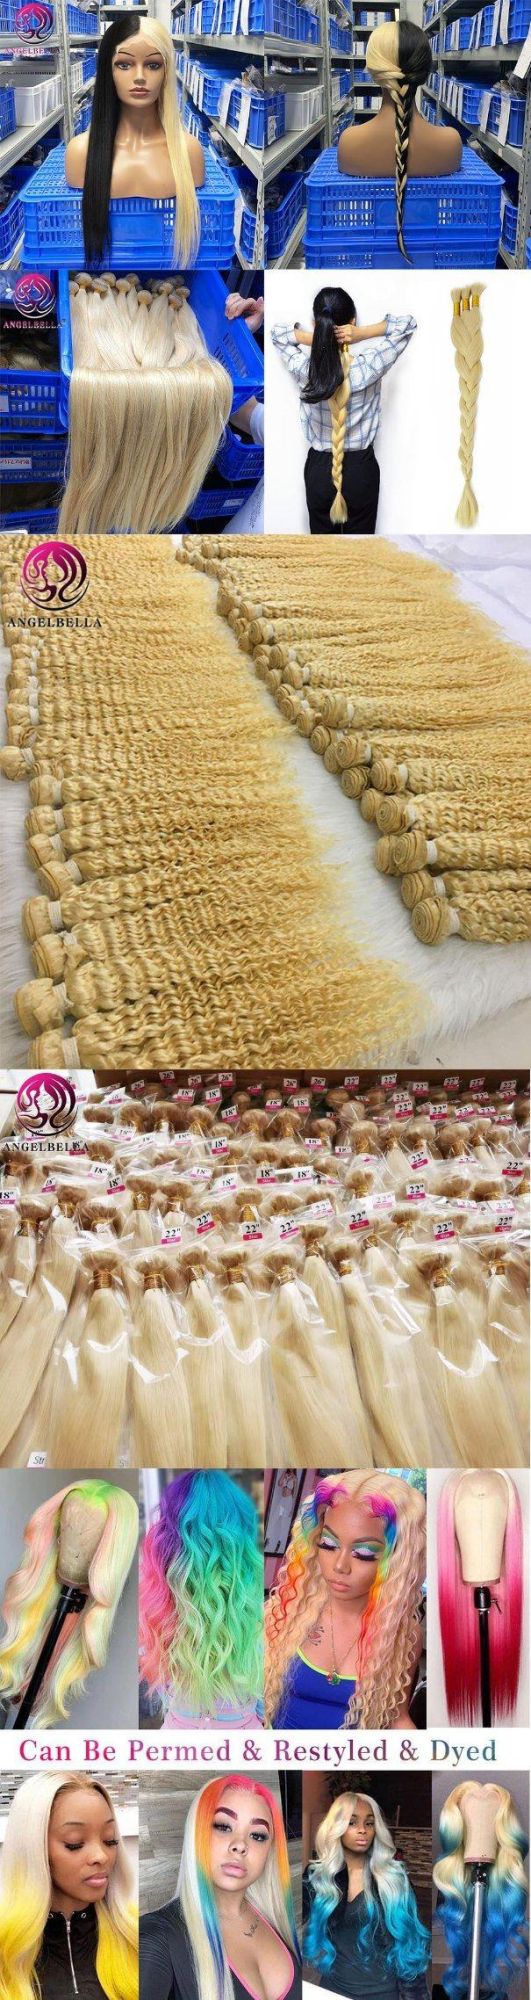 Factory Price Virgin Brazilian 613 Blonde Hair Extension Cuticle Aligned Remy Human Hair Extension Bundles Weave Wefts Vendor